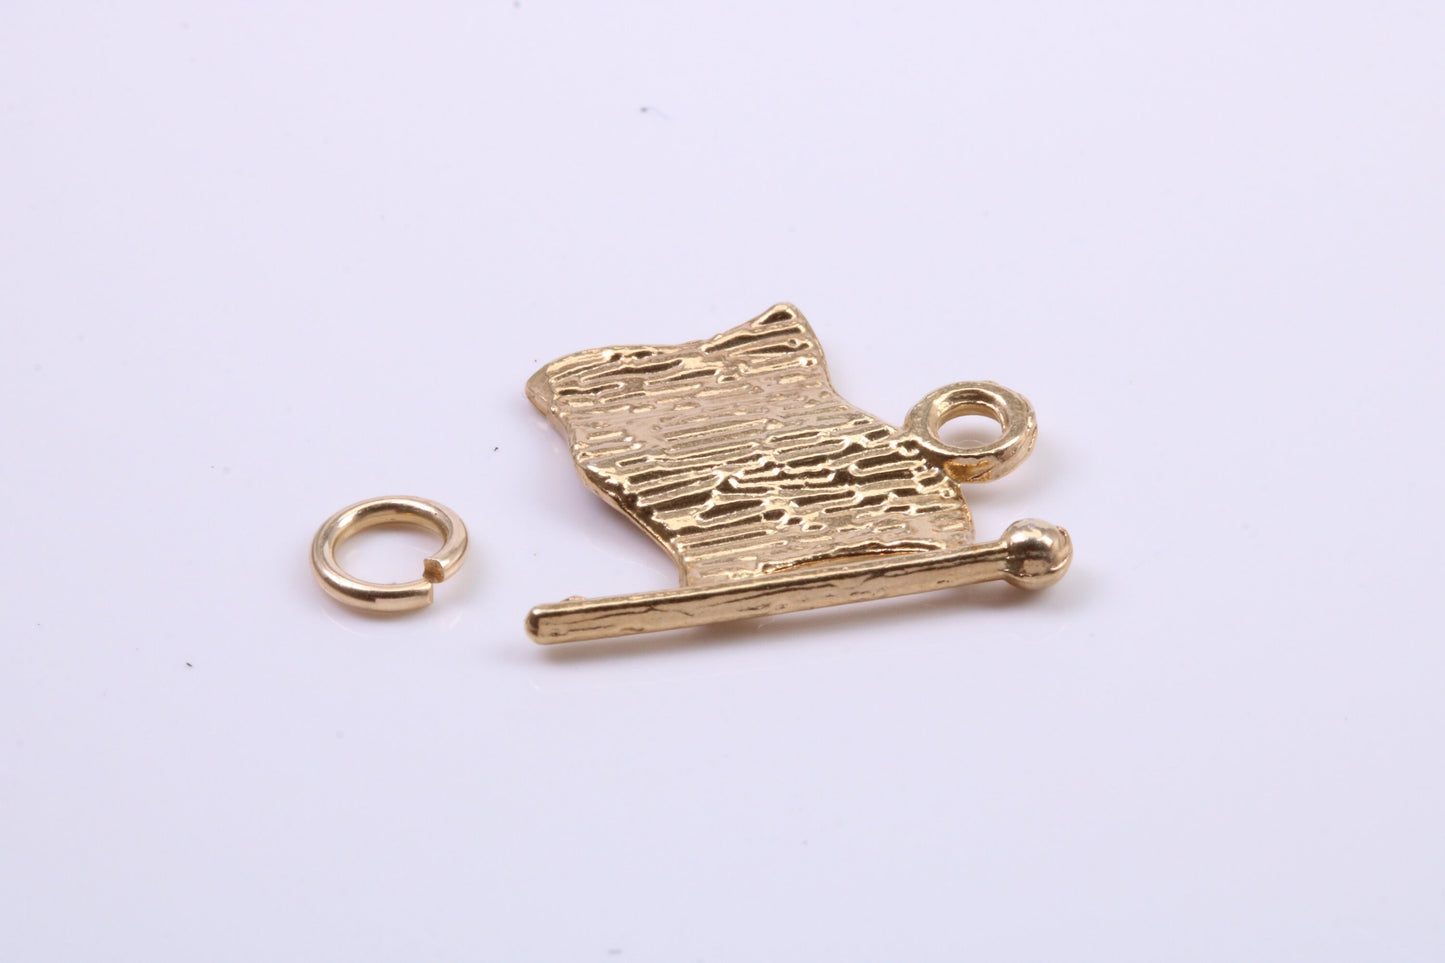 USA Flag Charm, Traditional Charm, Made from Solid 9ct Yellow Gold, British Hallmarked, Complete with Attachment Link